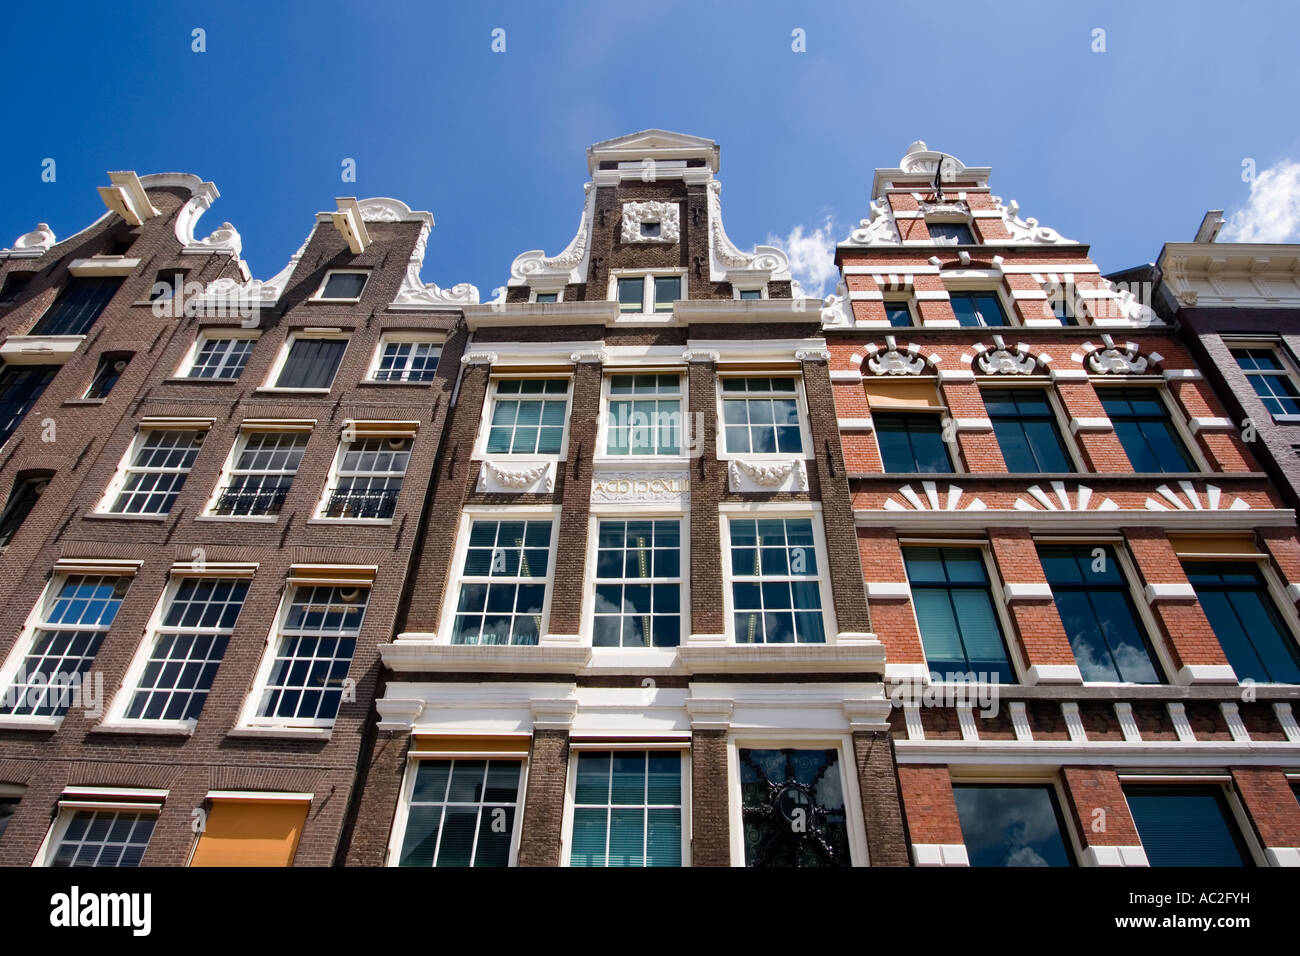 Amsterdam Damrak traditional architecture canalside houses Stock Photo